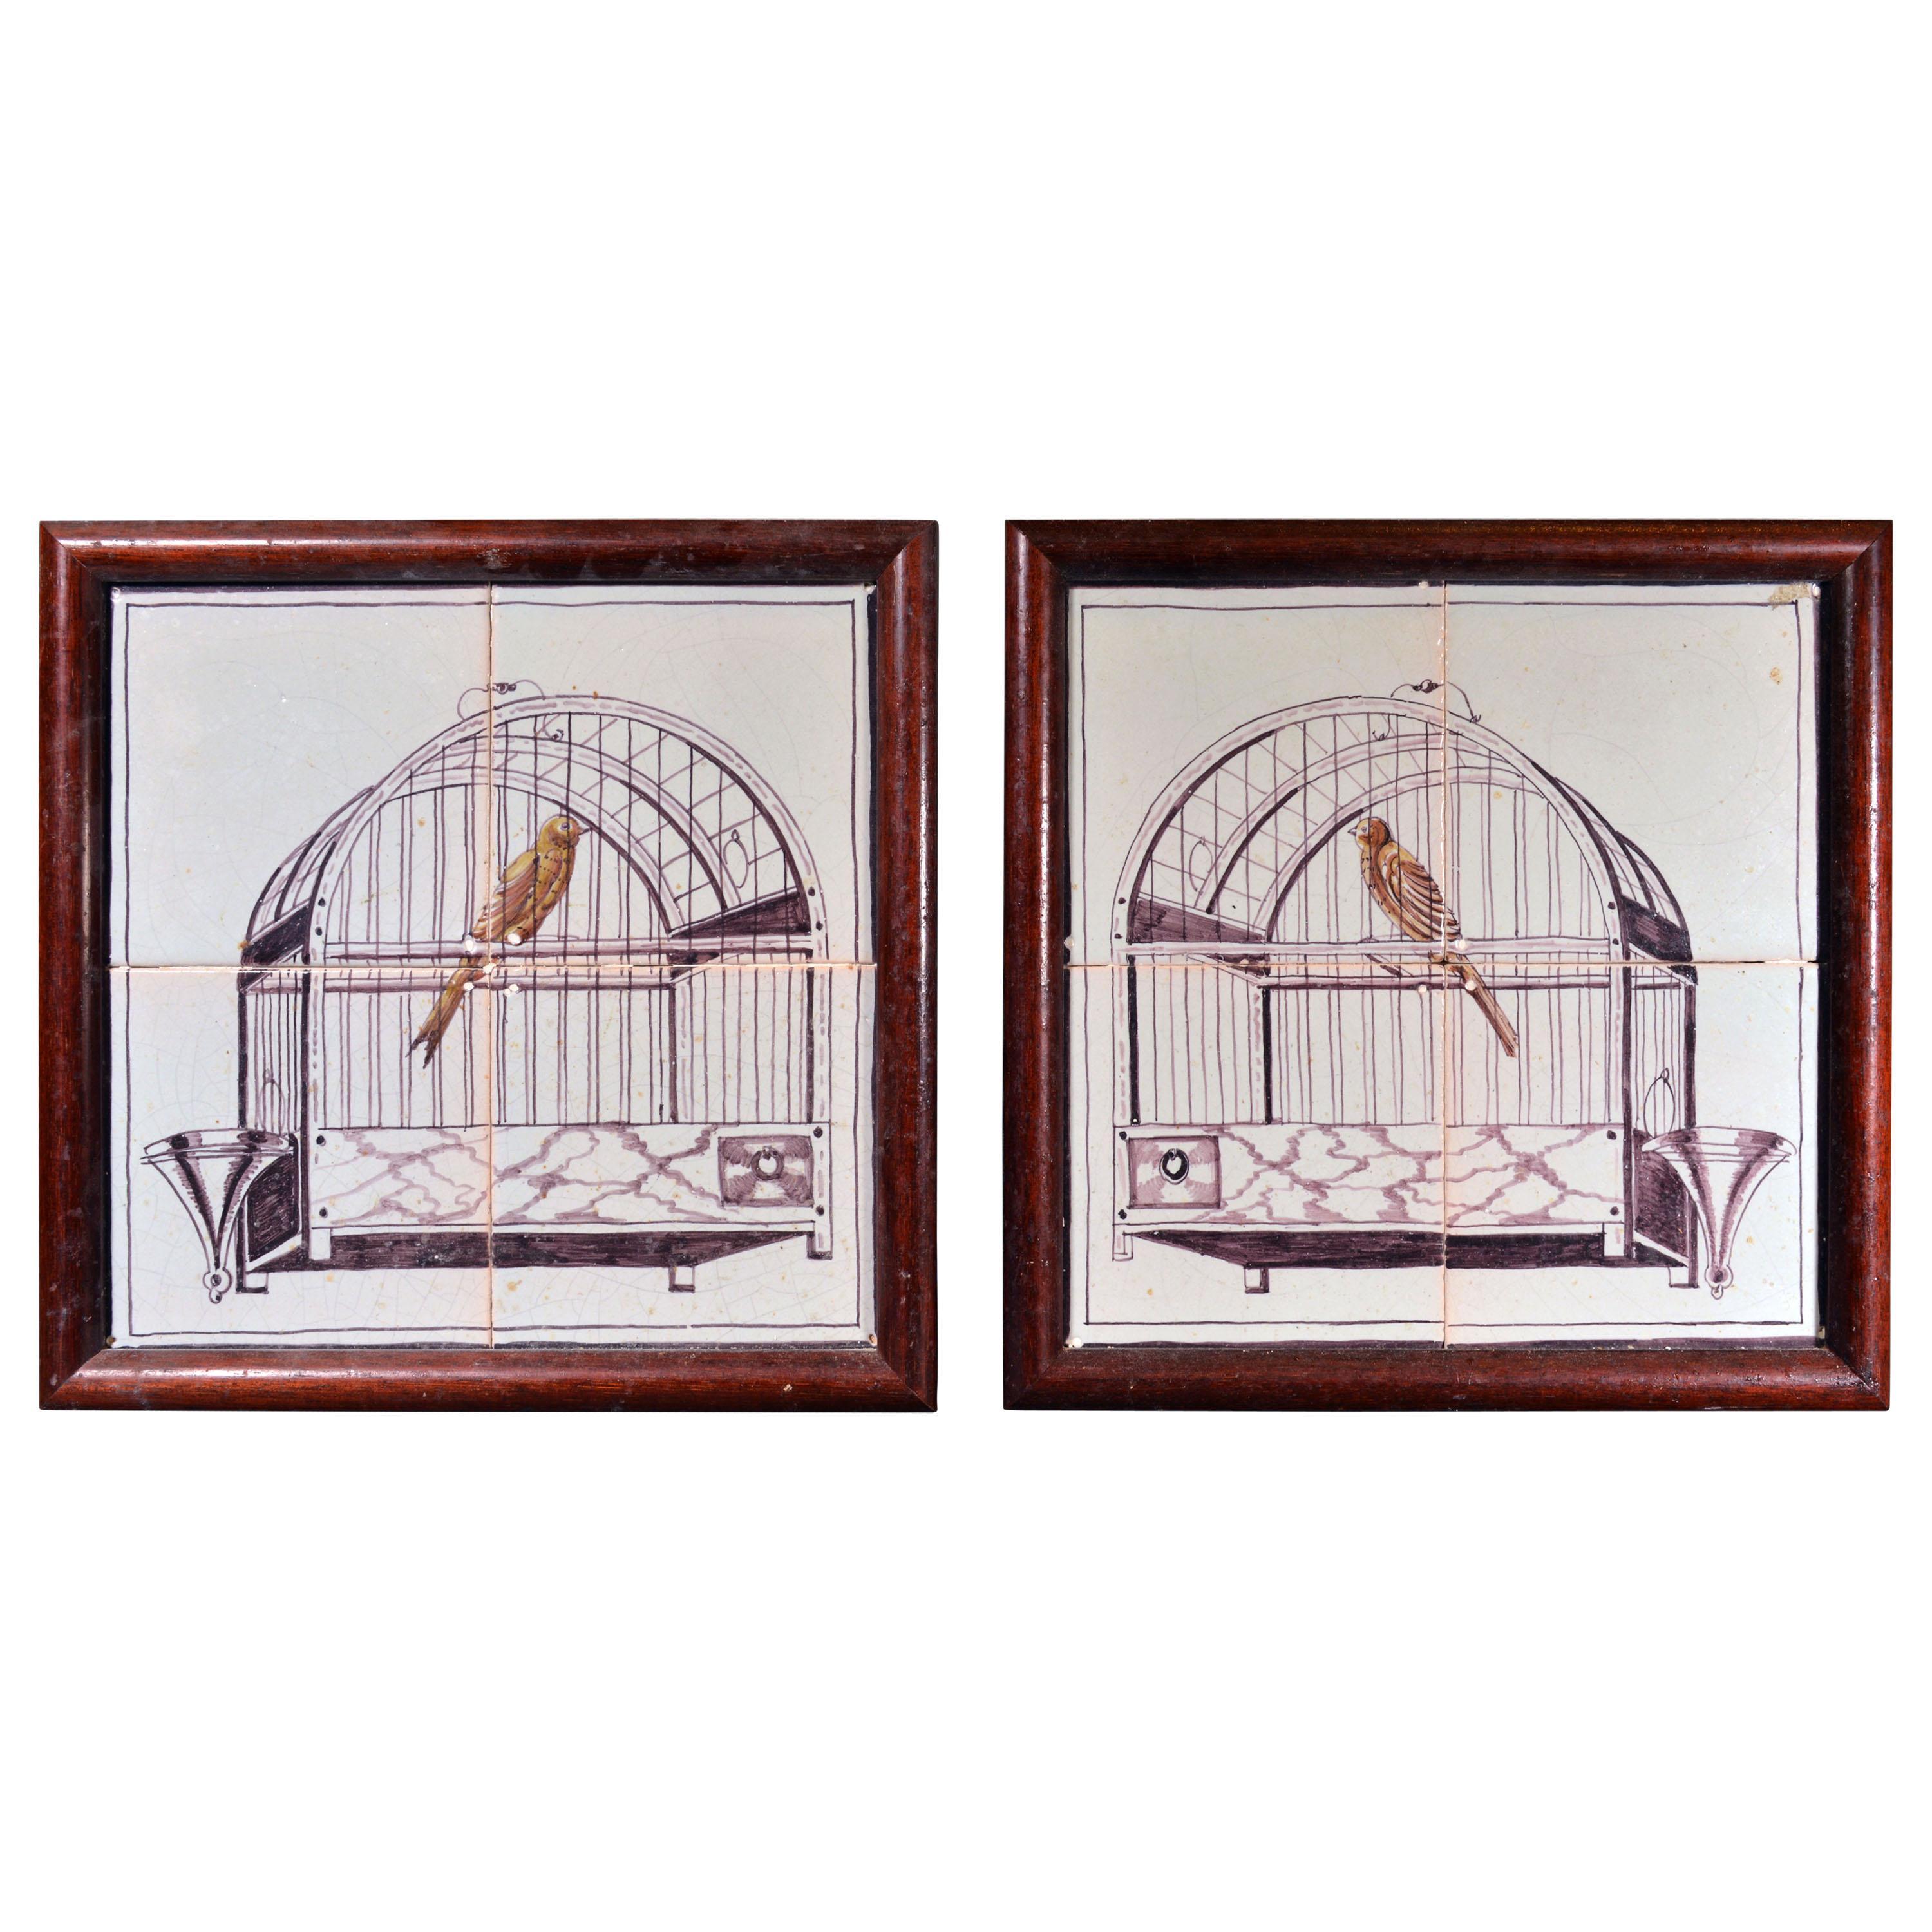 Dutch Delft Pair of Framed Tiles with Birds in Birdcages